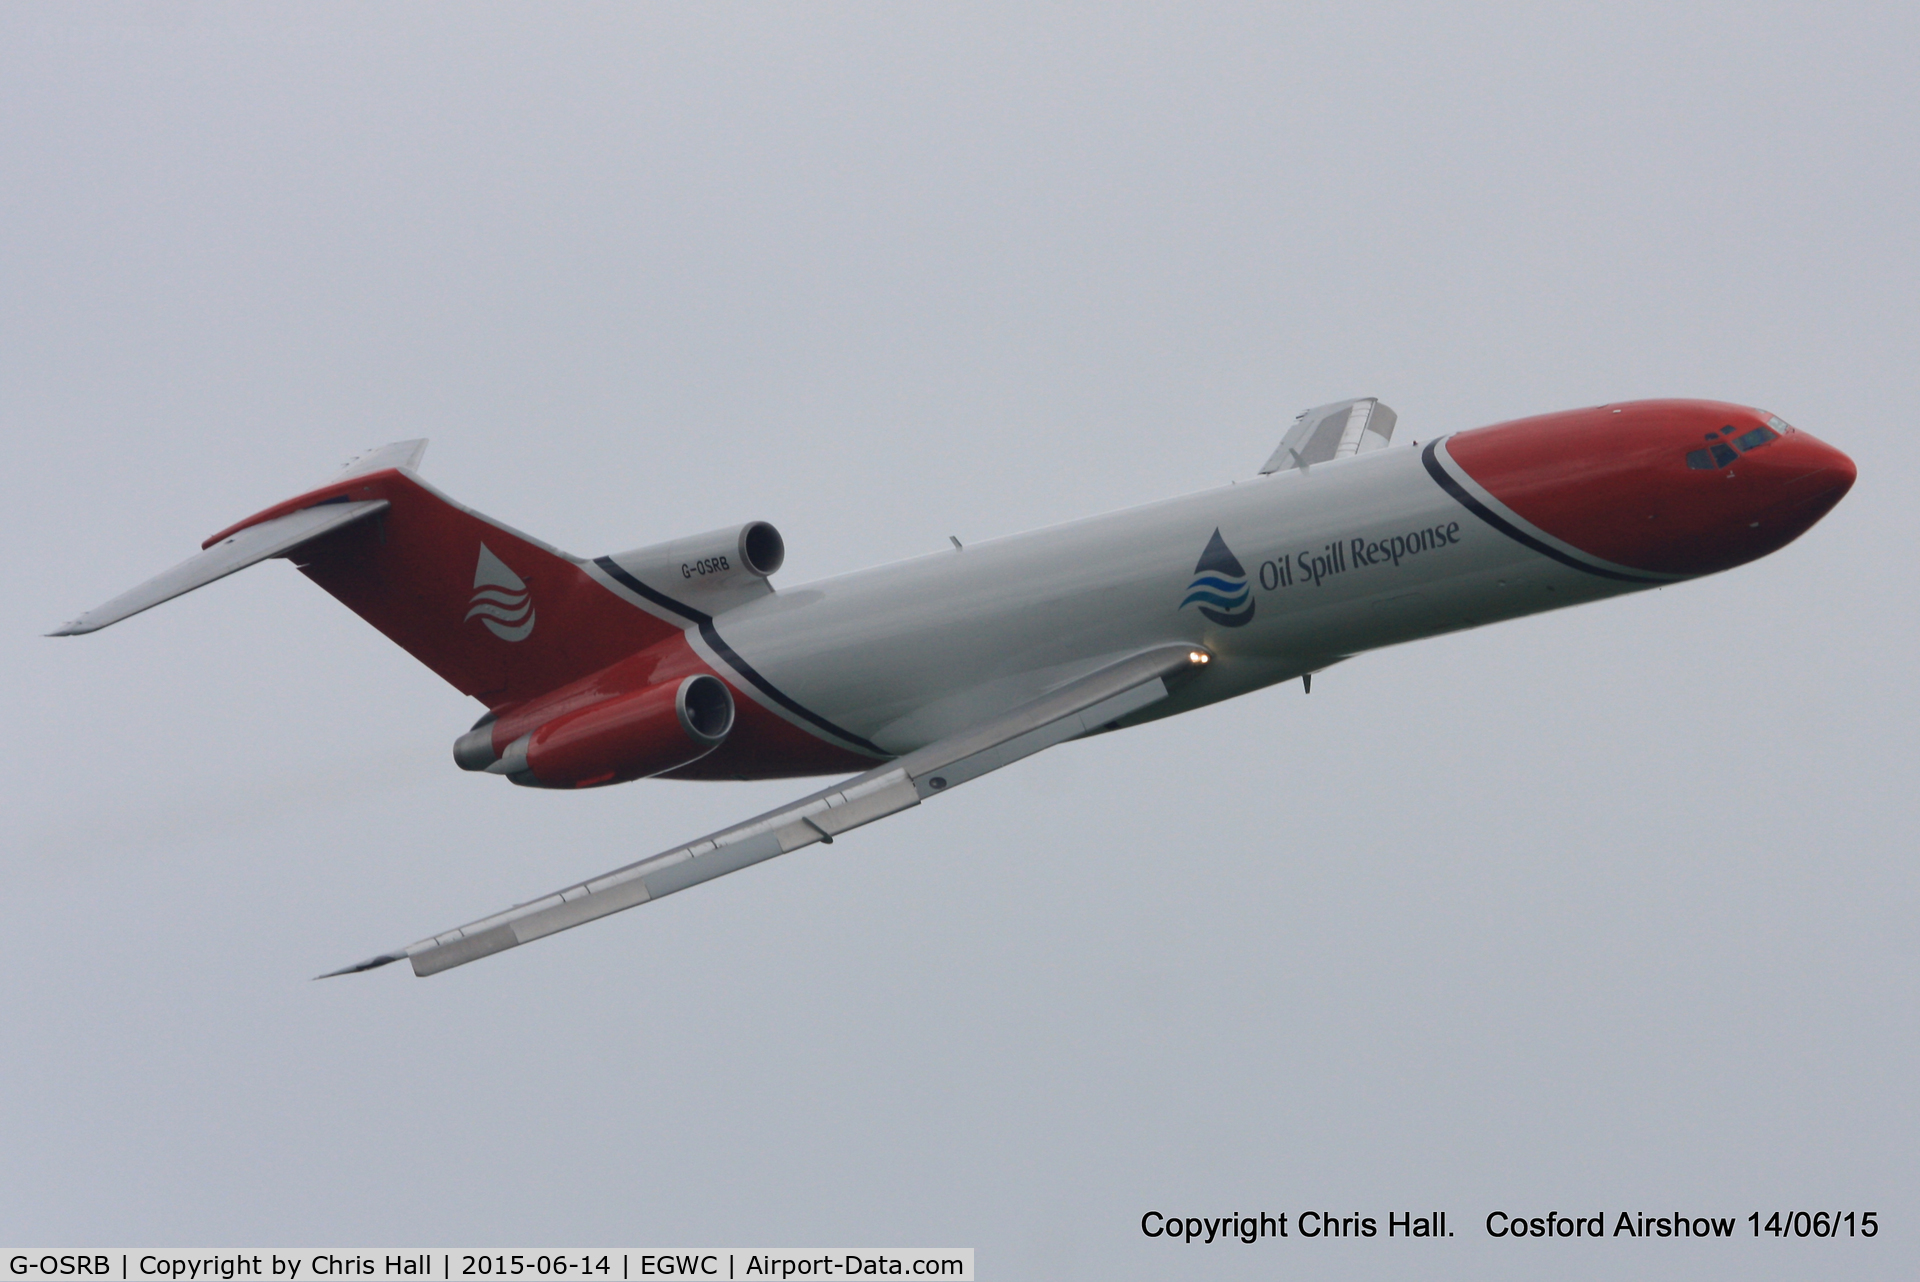 G-OSRB, 1983 Boeing 727-2S2F C/N 22929, displaying at the 2015 Cosford Airshow